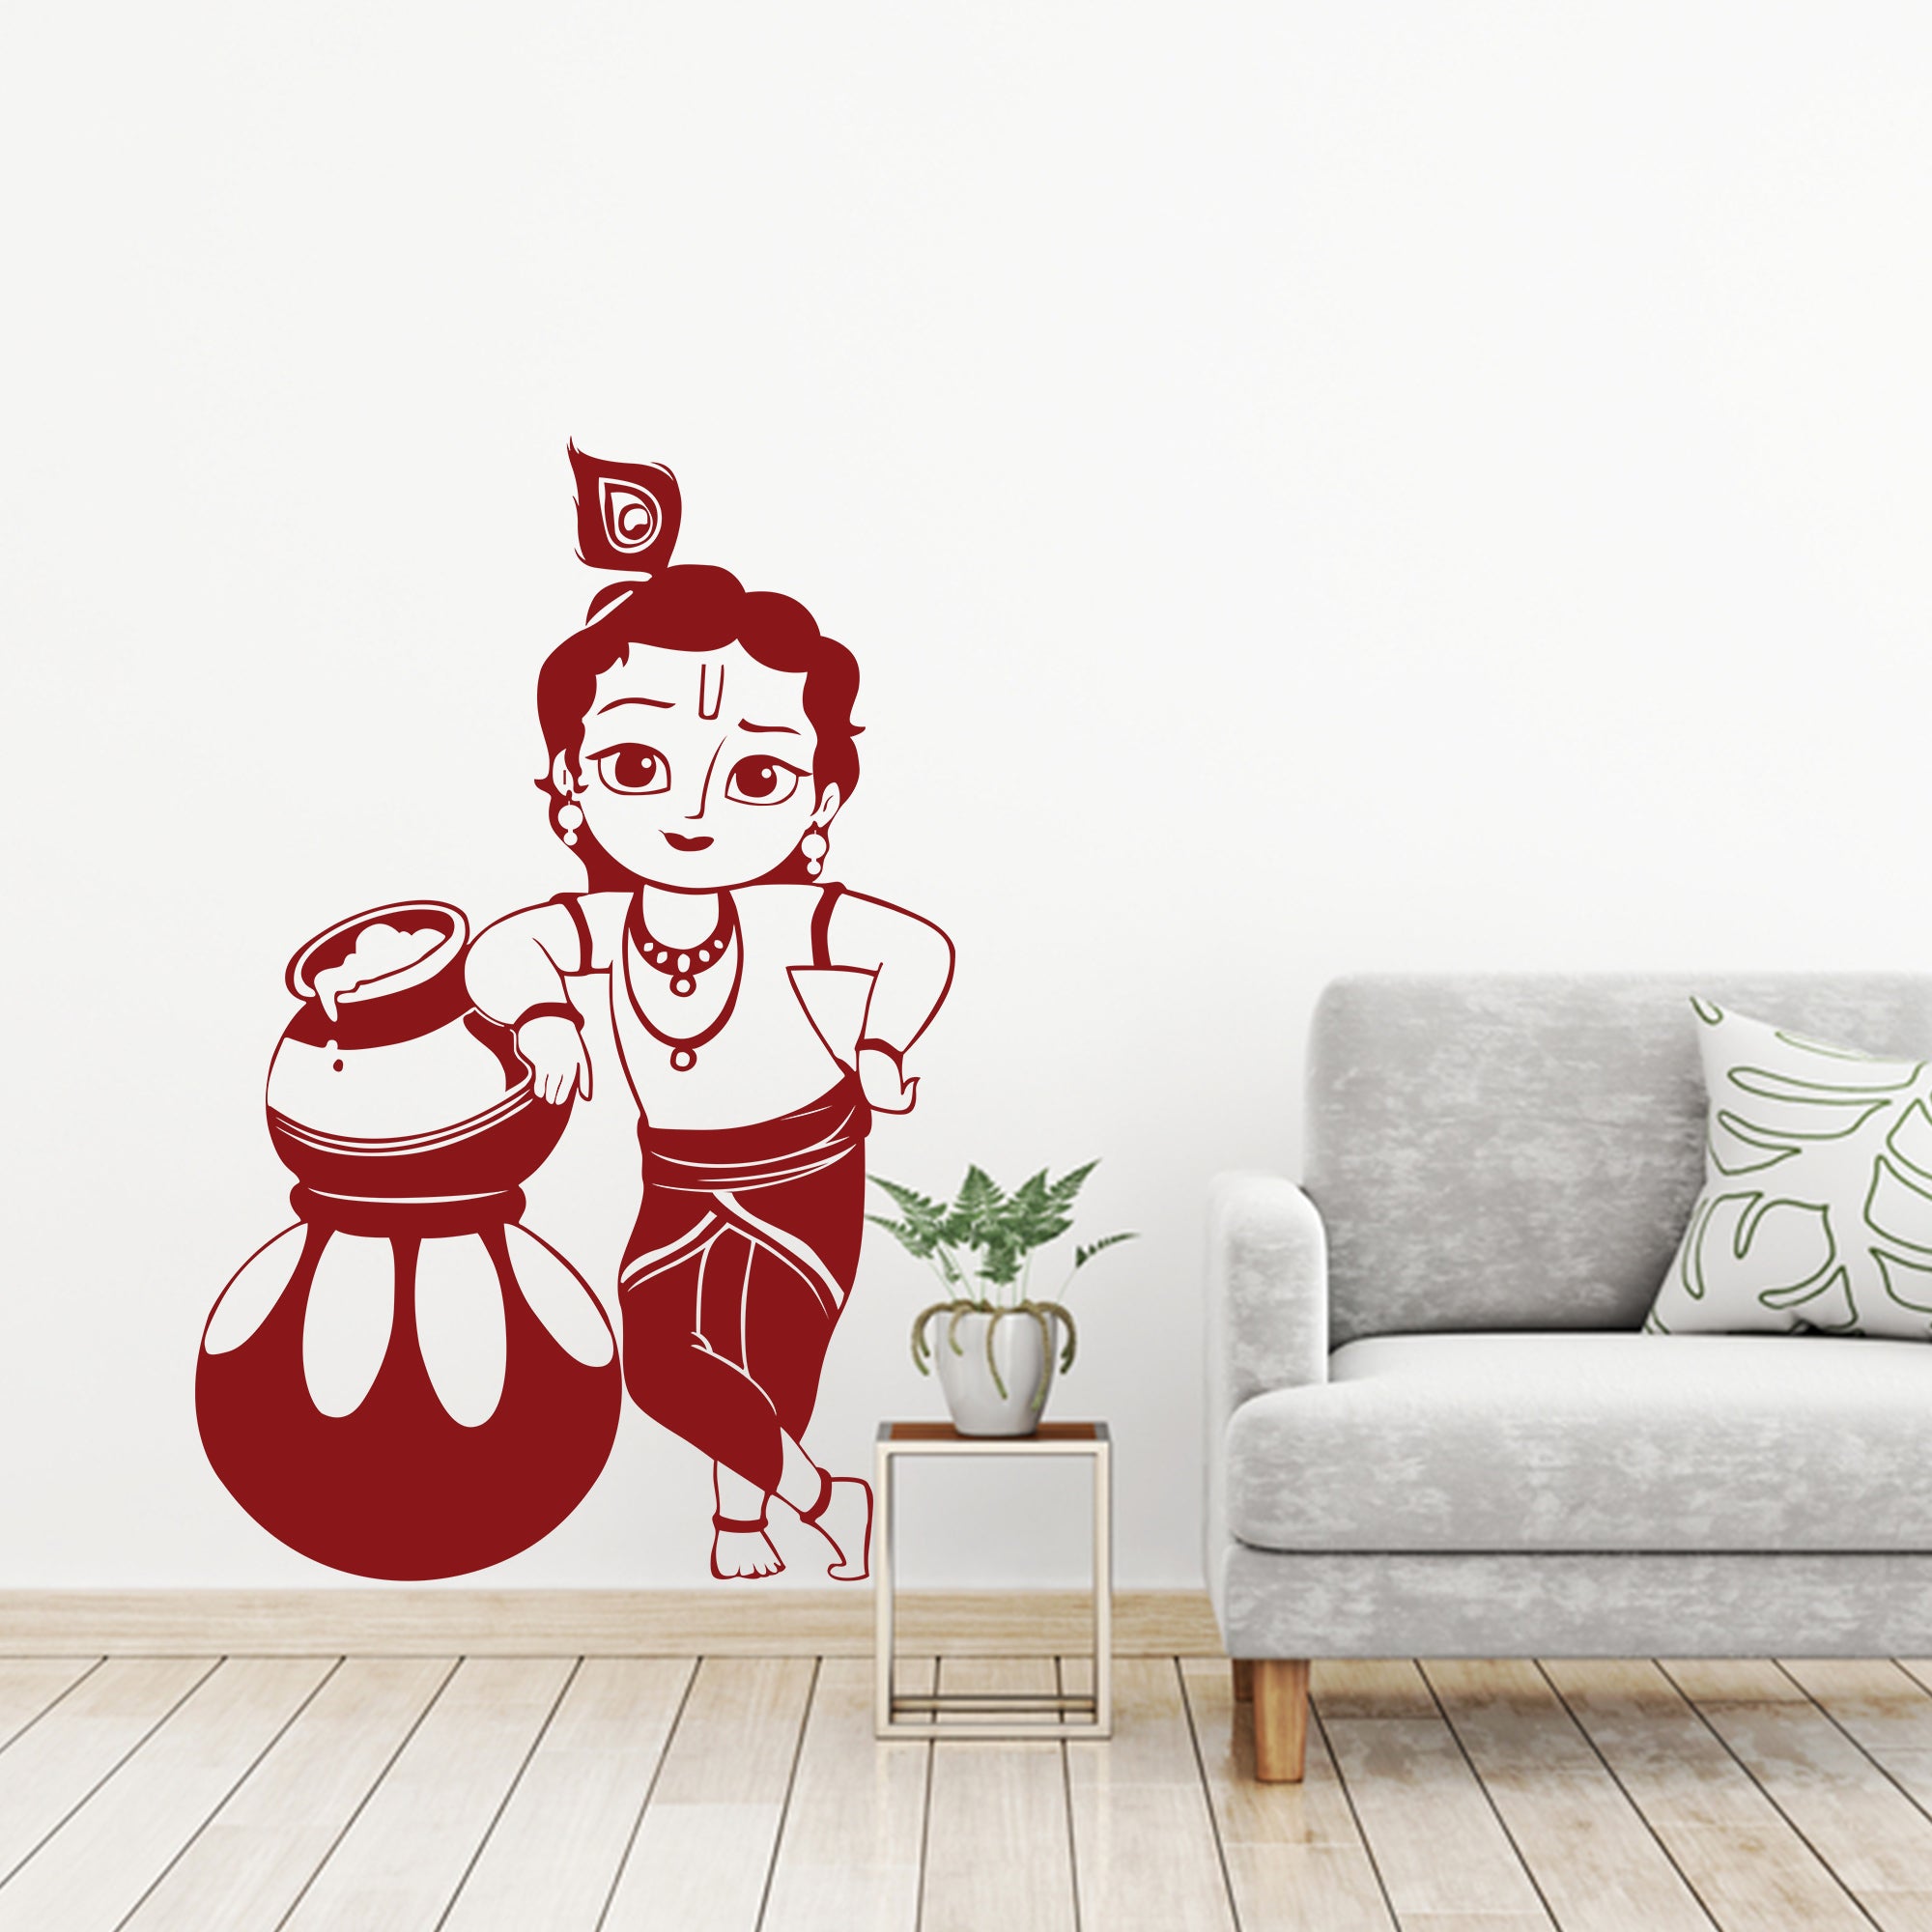 Quality Wall Sticker in Brown Color